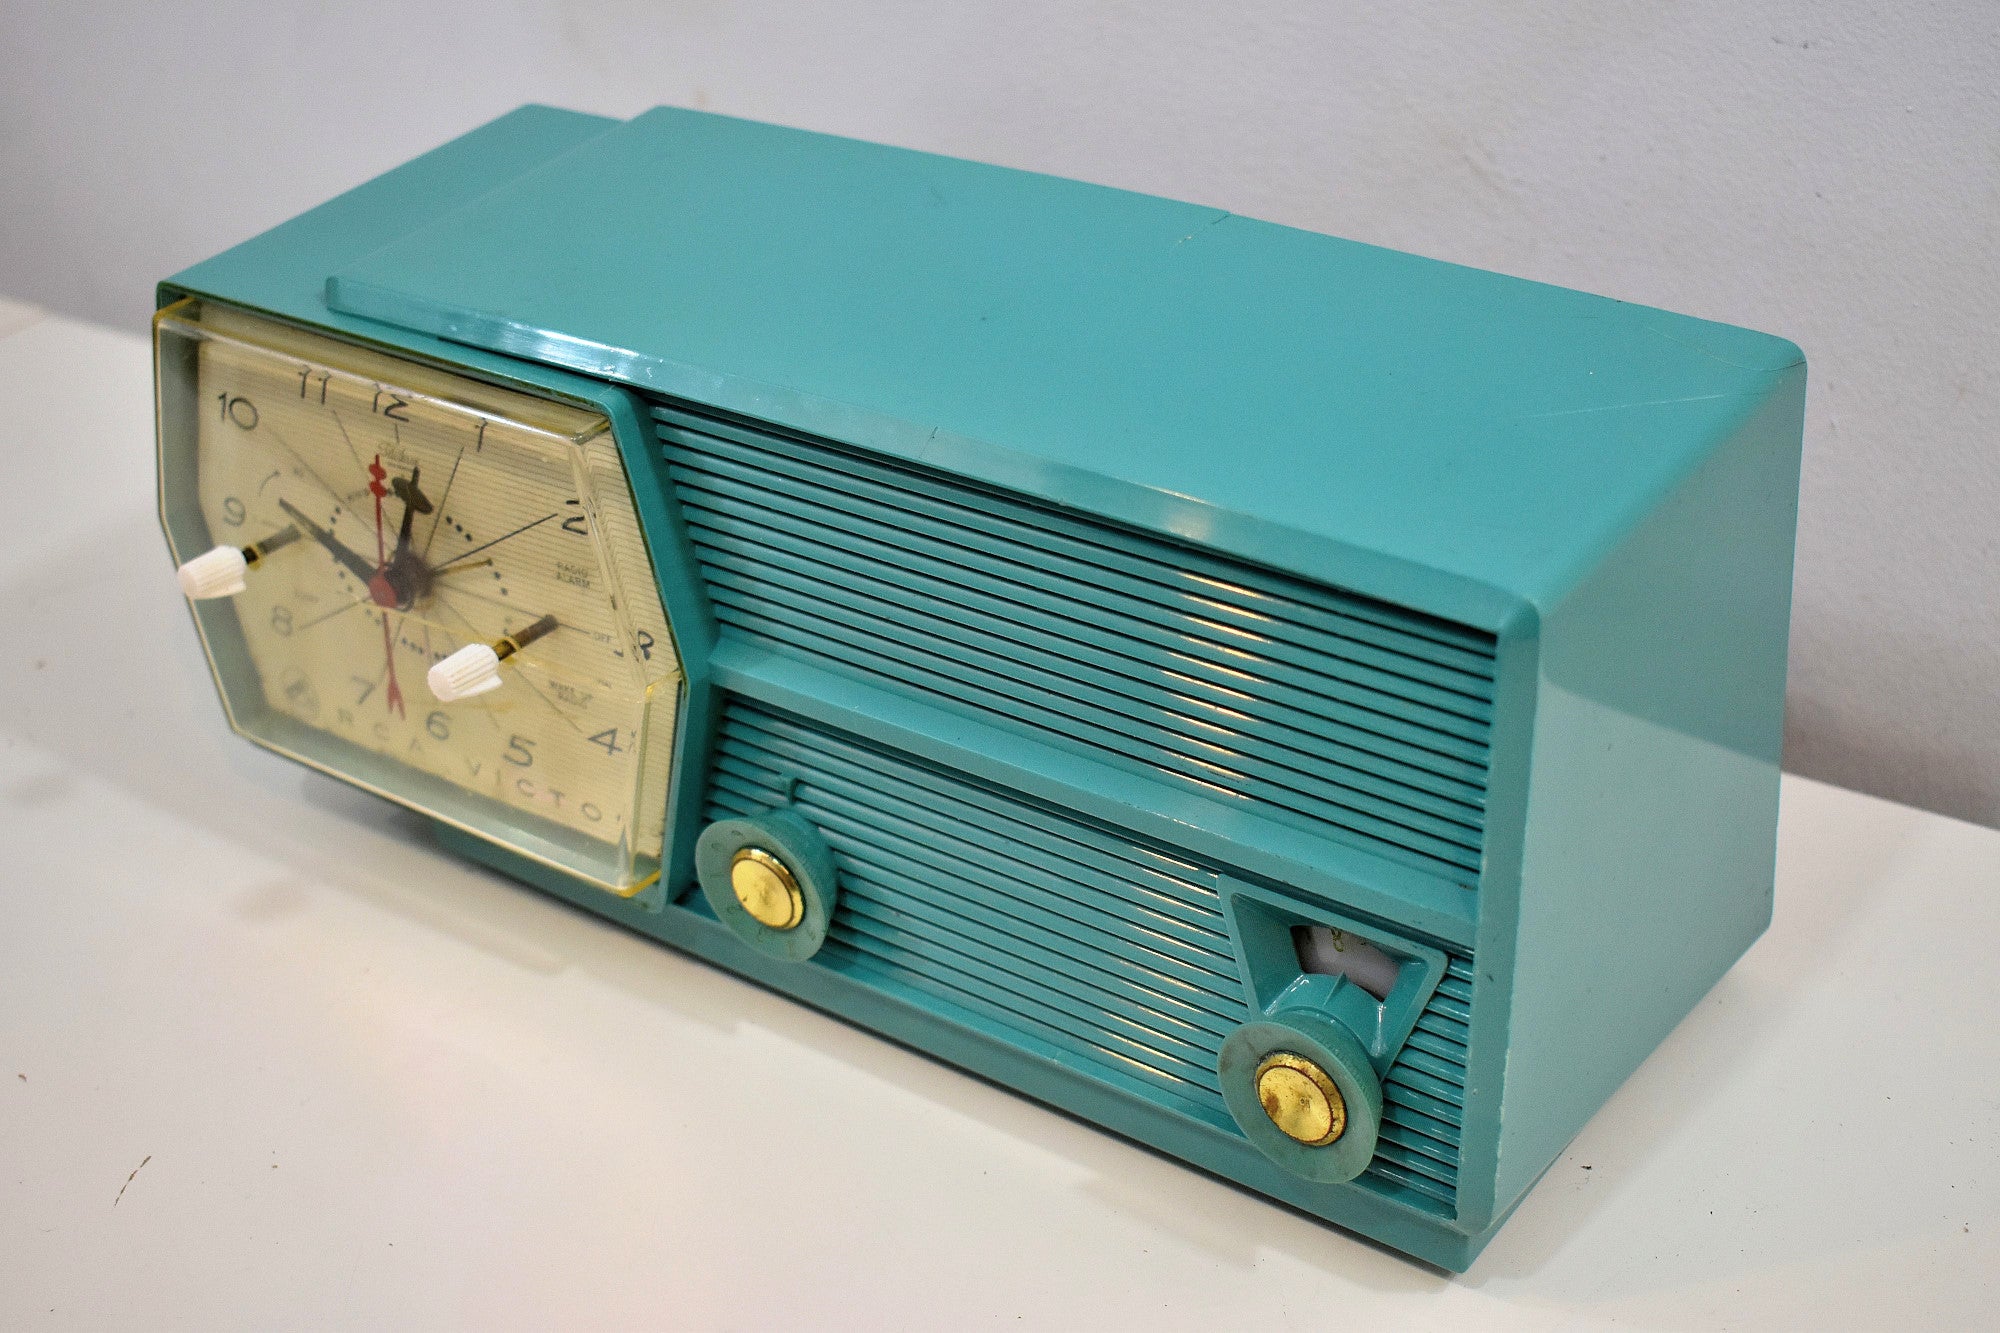 Bluetooth Ready To Go - Teal Turquoise 1957 RCA Victor Model 8-C-6L AM Clock Radio Good Condition Looks Great!